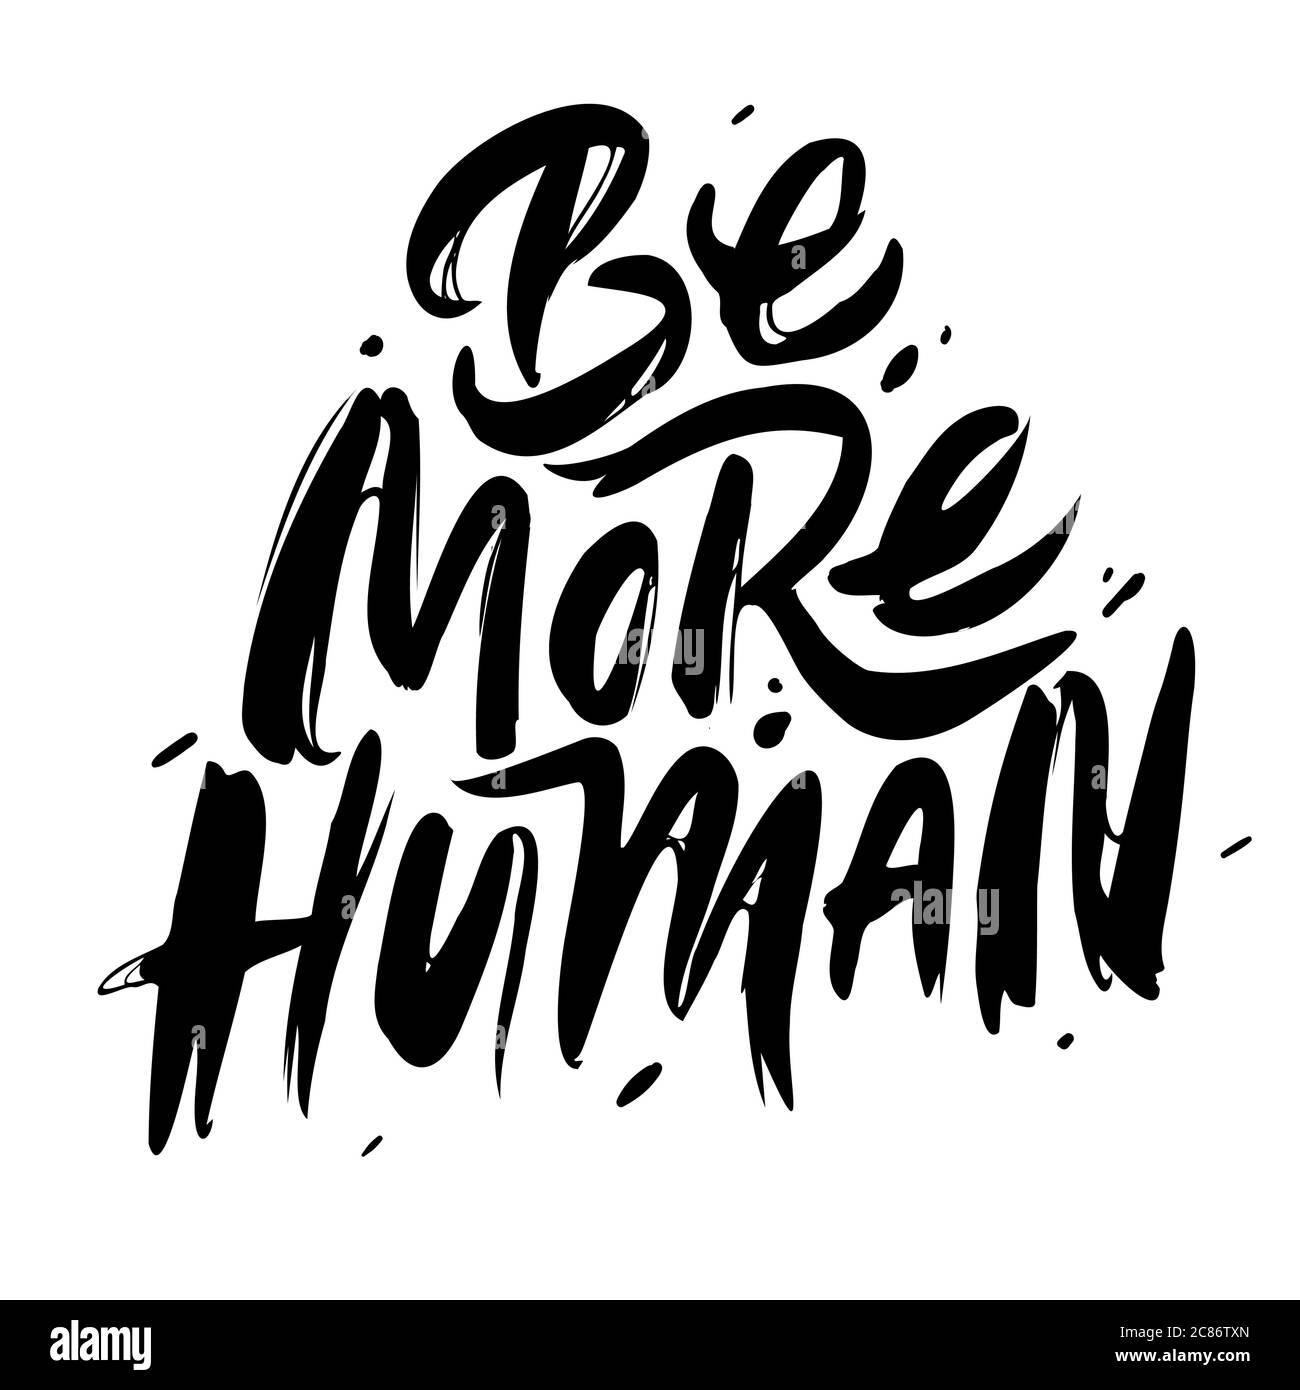 Be more human. Hand drawn poster with quote lettering. Inspirational and motivational print for T-shirts and postcards, posters, etc. Stock Vector